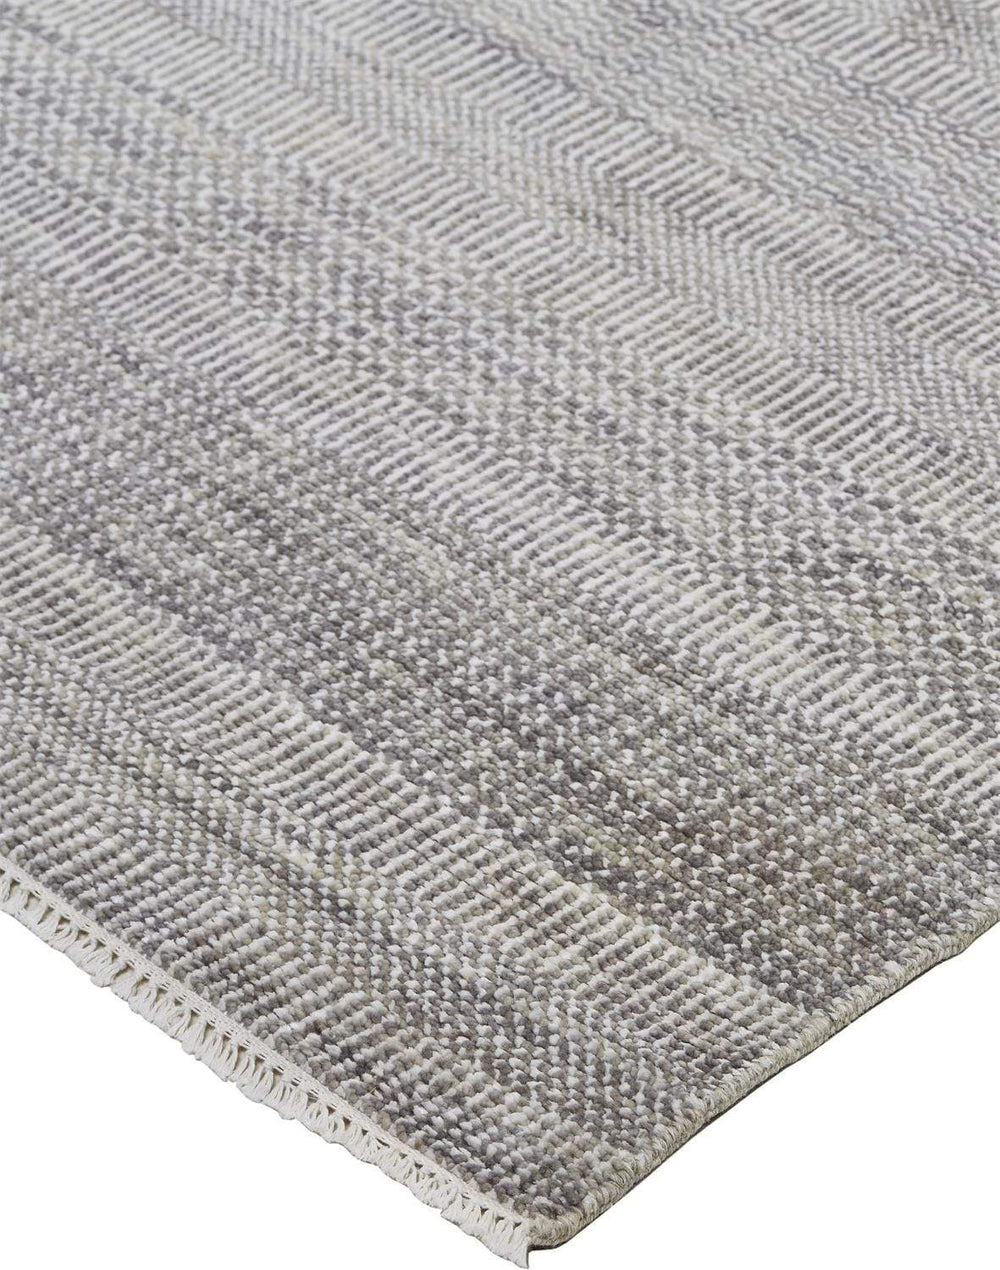 Feizy Feizy Janson Classic Striped Rug - Steel & Silver Gray - Available in 8 Sizes